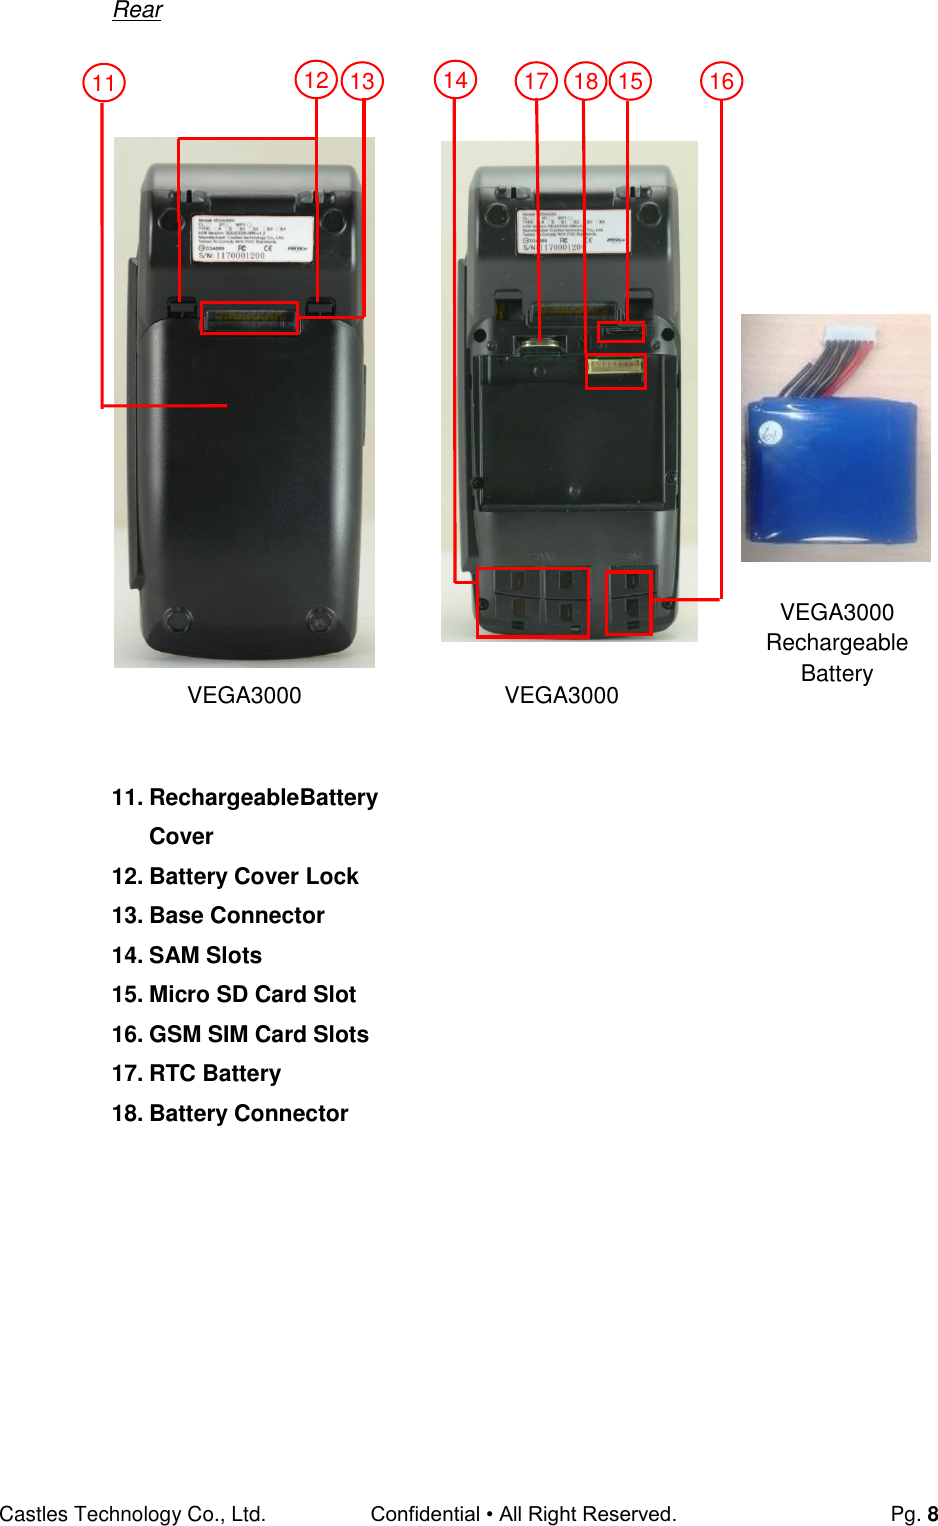 Castles Technology Co., Ltd. Confidential • All Right Reserved.  Pg. 8 Rear                          11. RechargeableBattery Cover 12. Battery Cover Lock  13. Base Connector 14. SAM Slots 15. Micro SD Card Slot 16. GSM SIM Card Slots 17. RTC Battery 18. Battery Connector     VEGA3000 VEGA3000 VEGA3000 Rechargeable Battery 11 12 13 17 14 18 15 16 